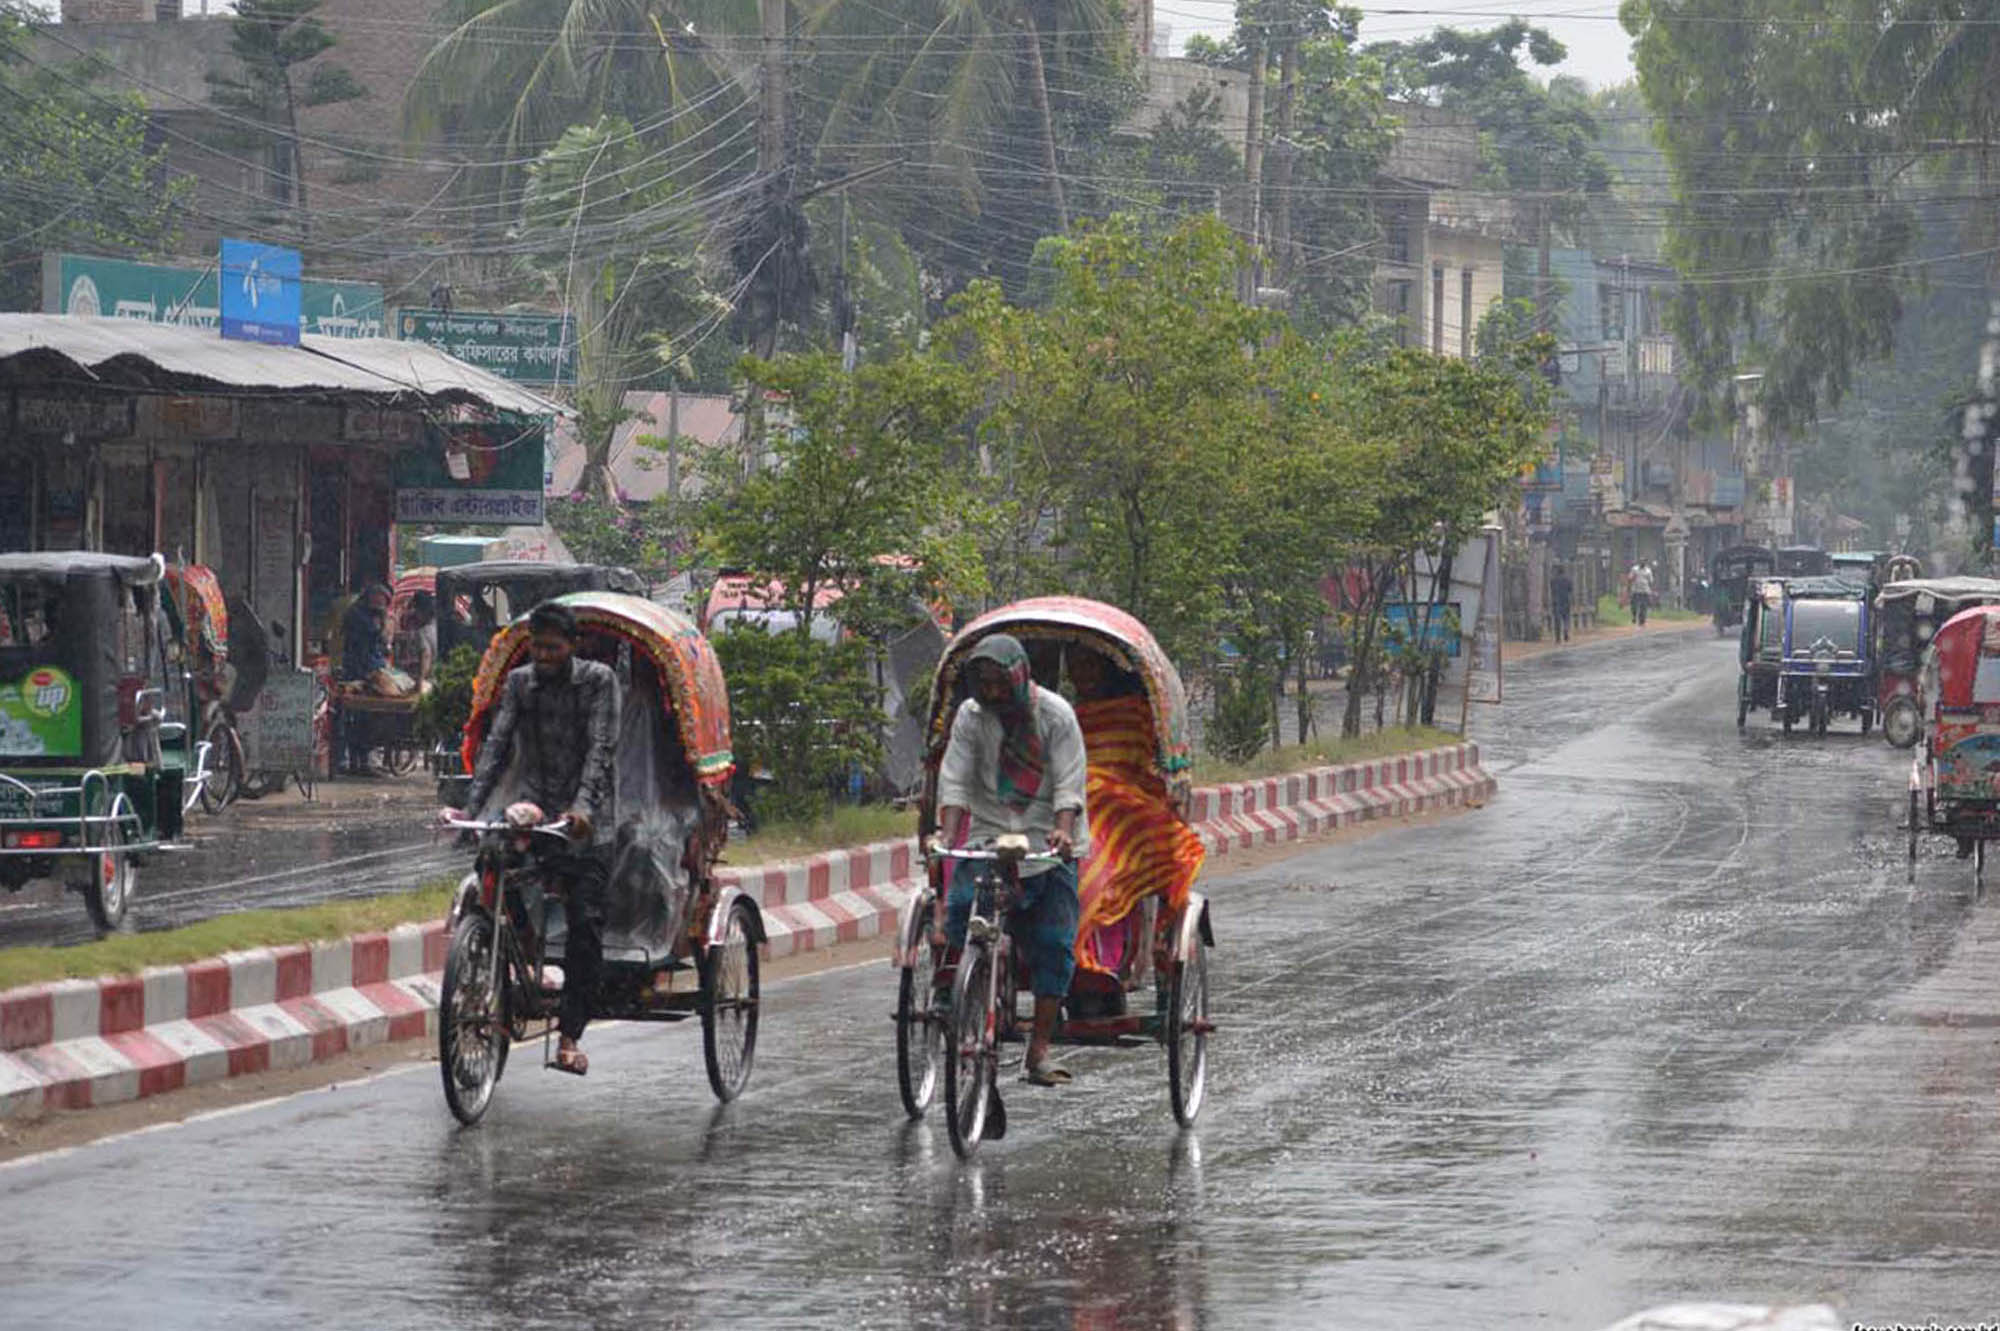 More rains likely to drench Bangladesh